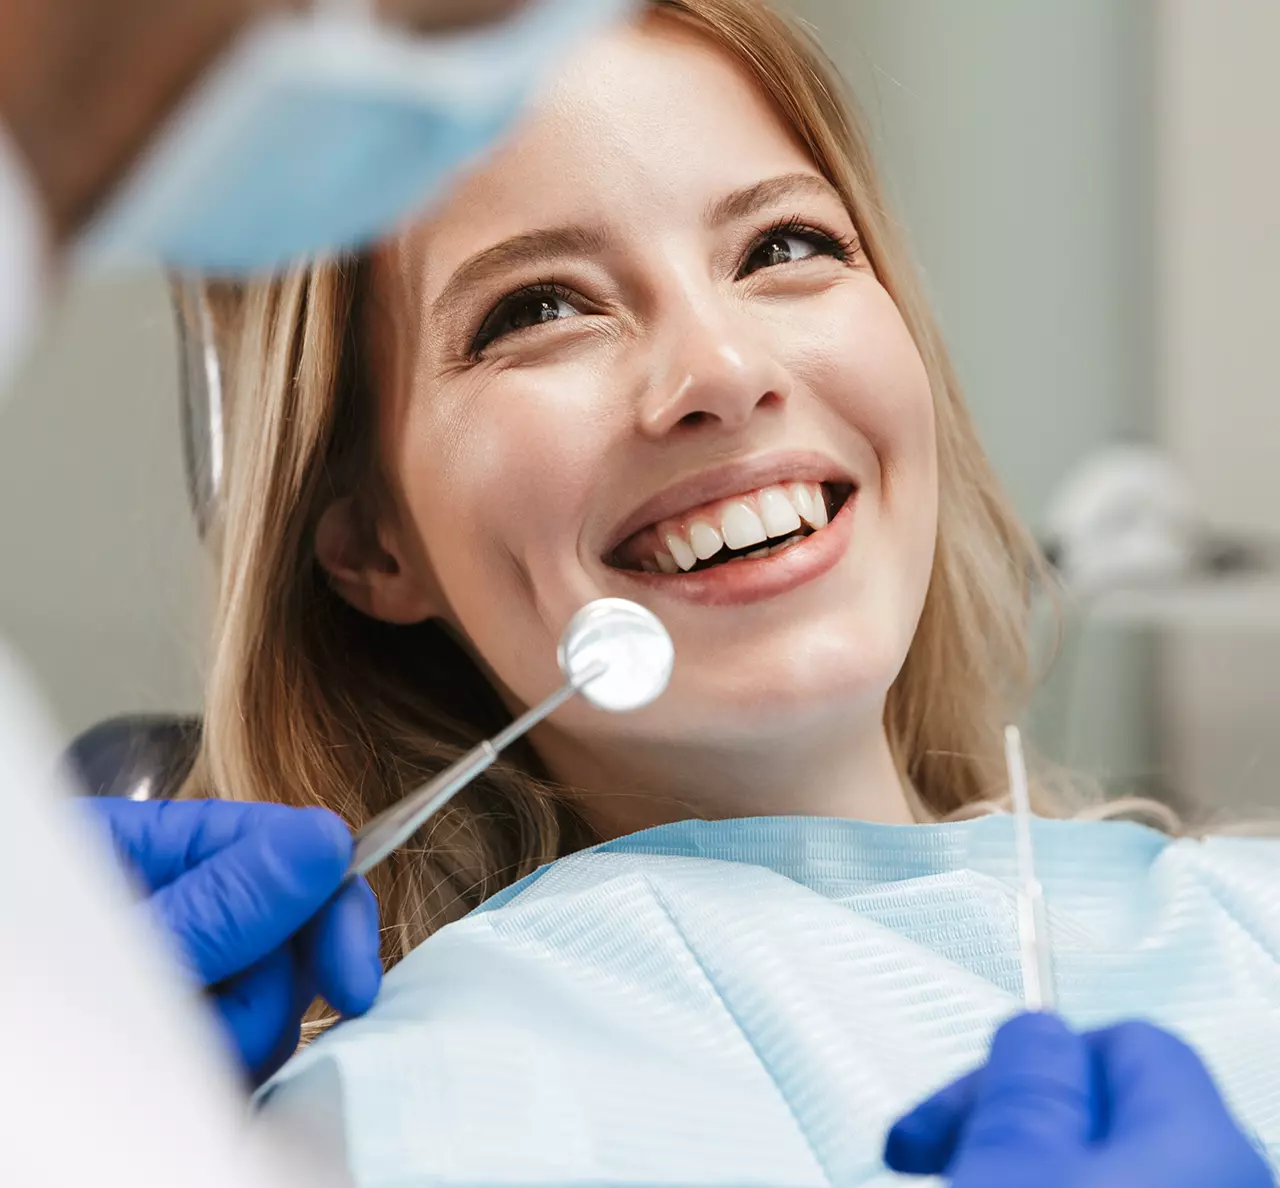 Exceptional Dental Services Practice in Lisle, IL. 